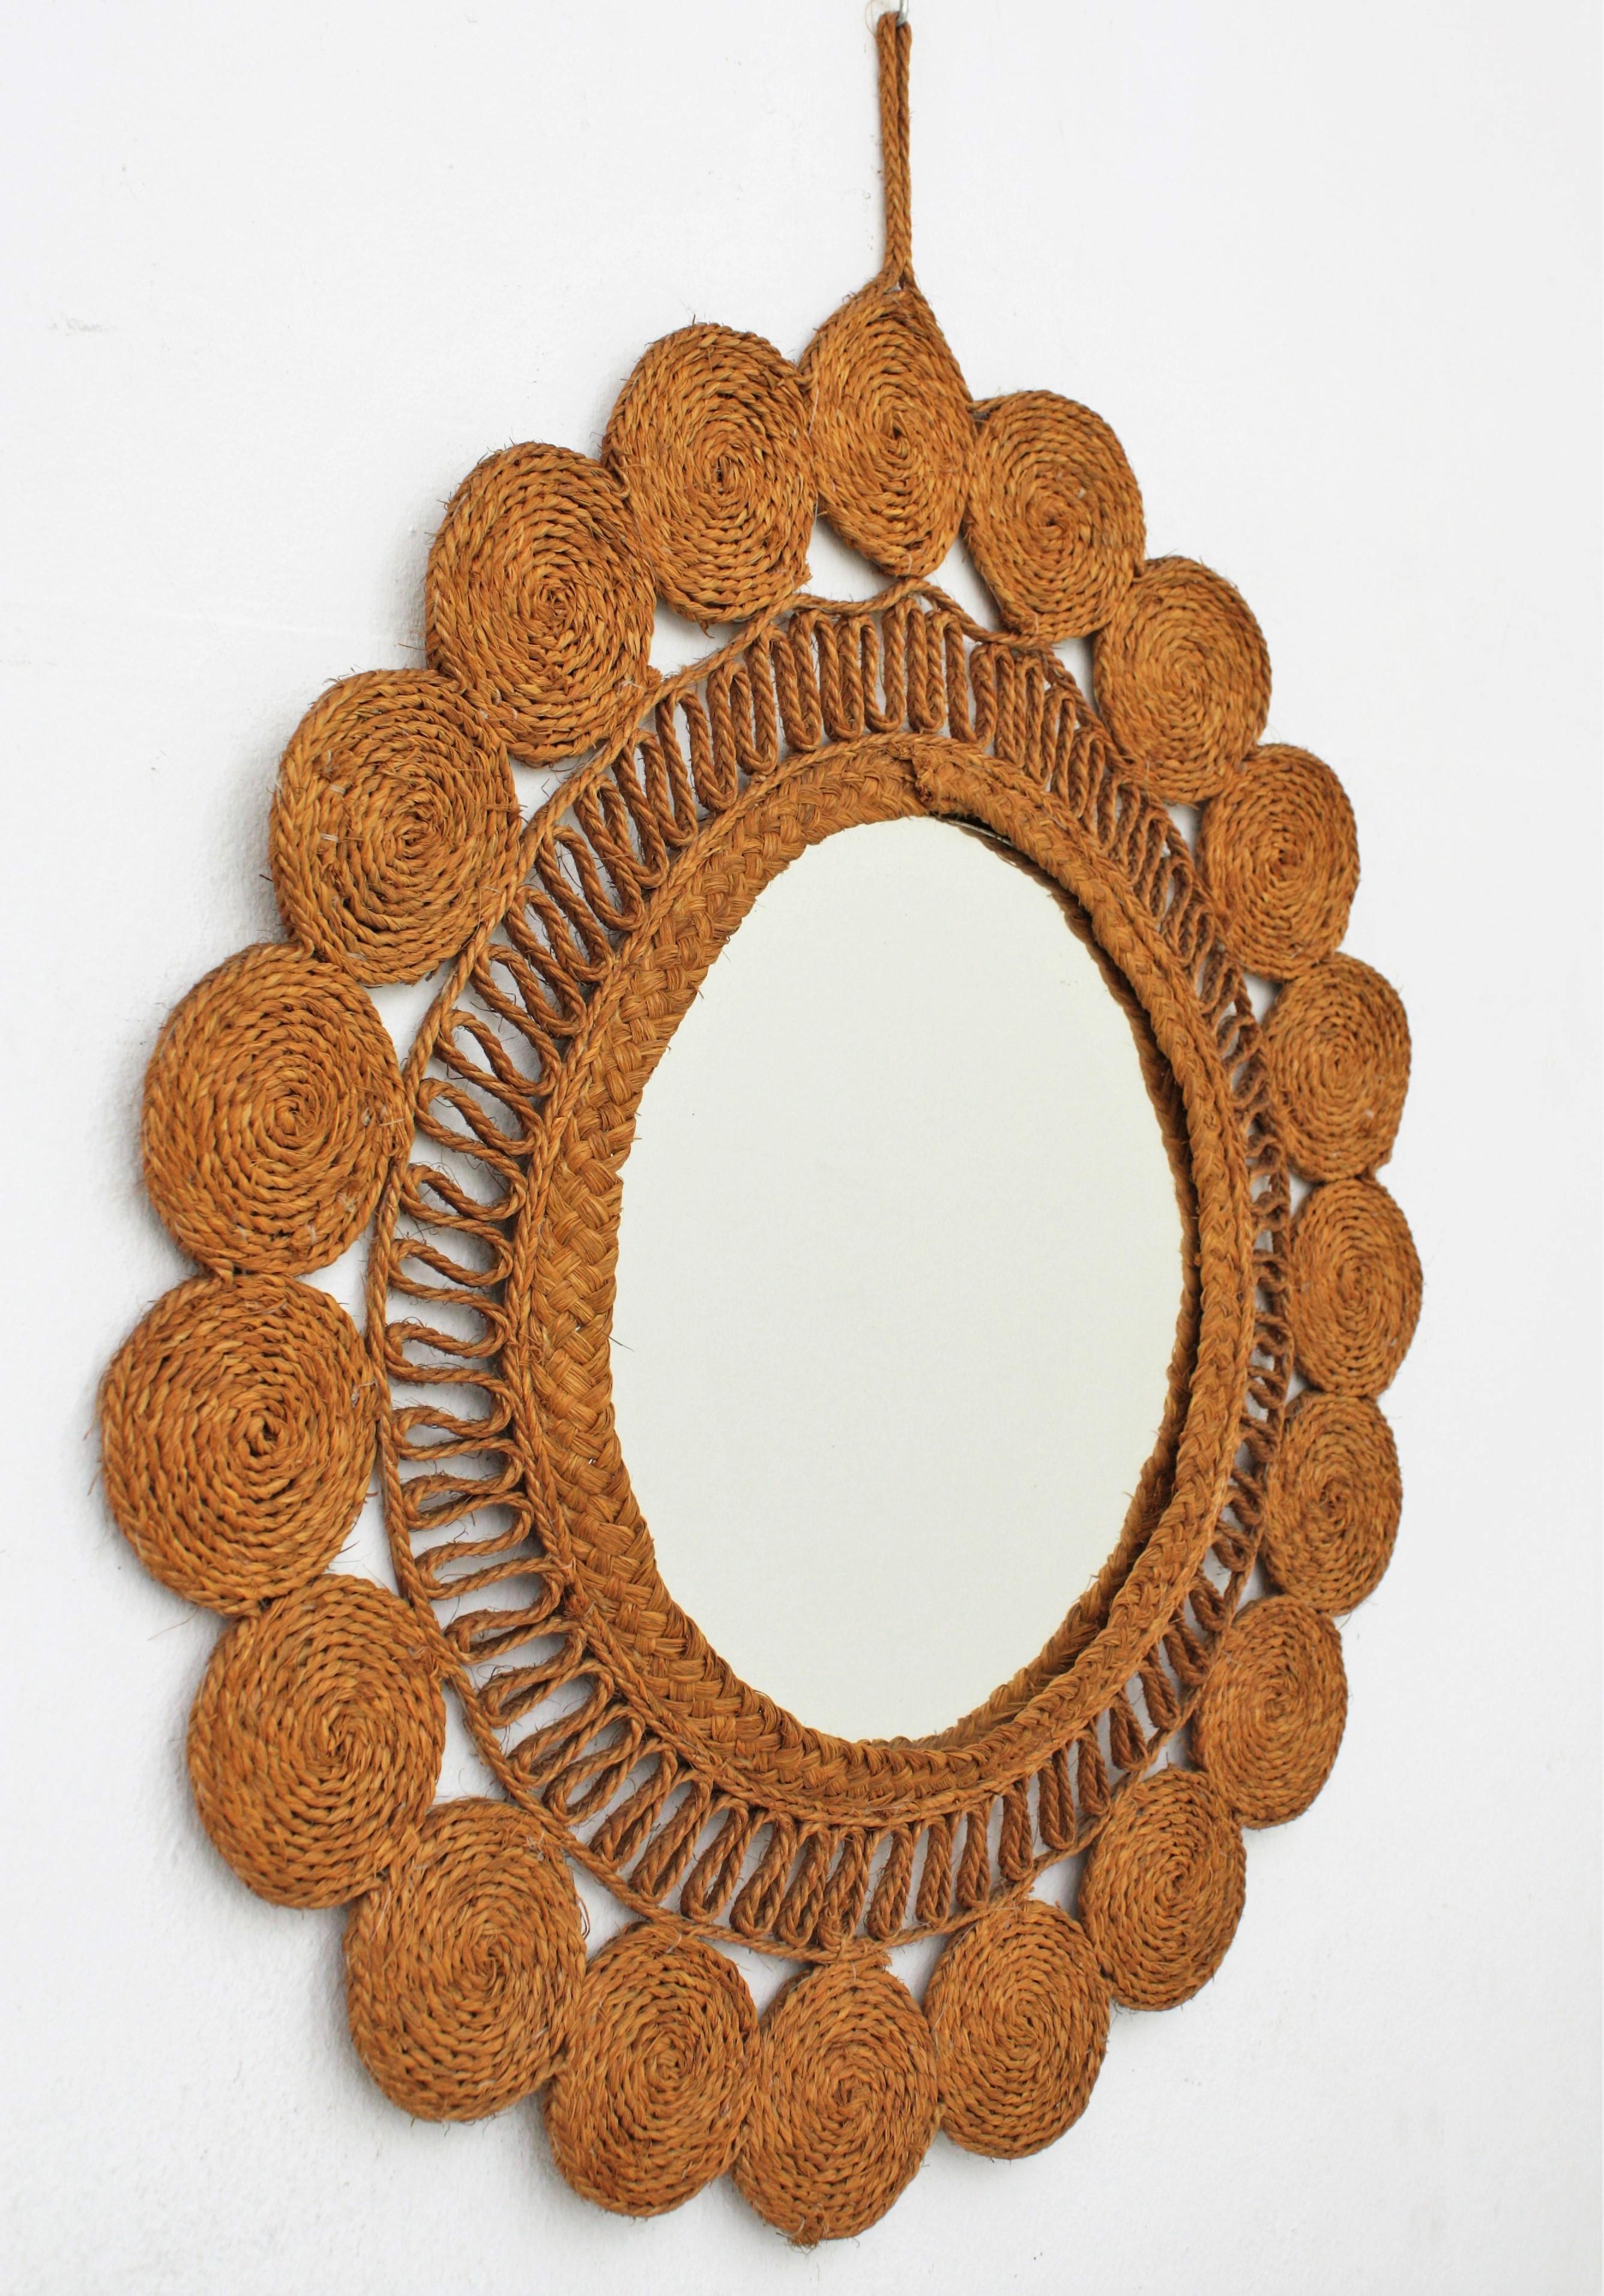 Woven Esparto Rope Wall Mirror, Spain, 1960s For Sale 5